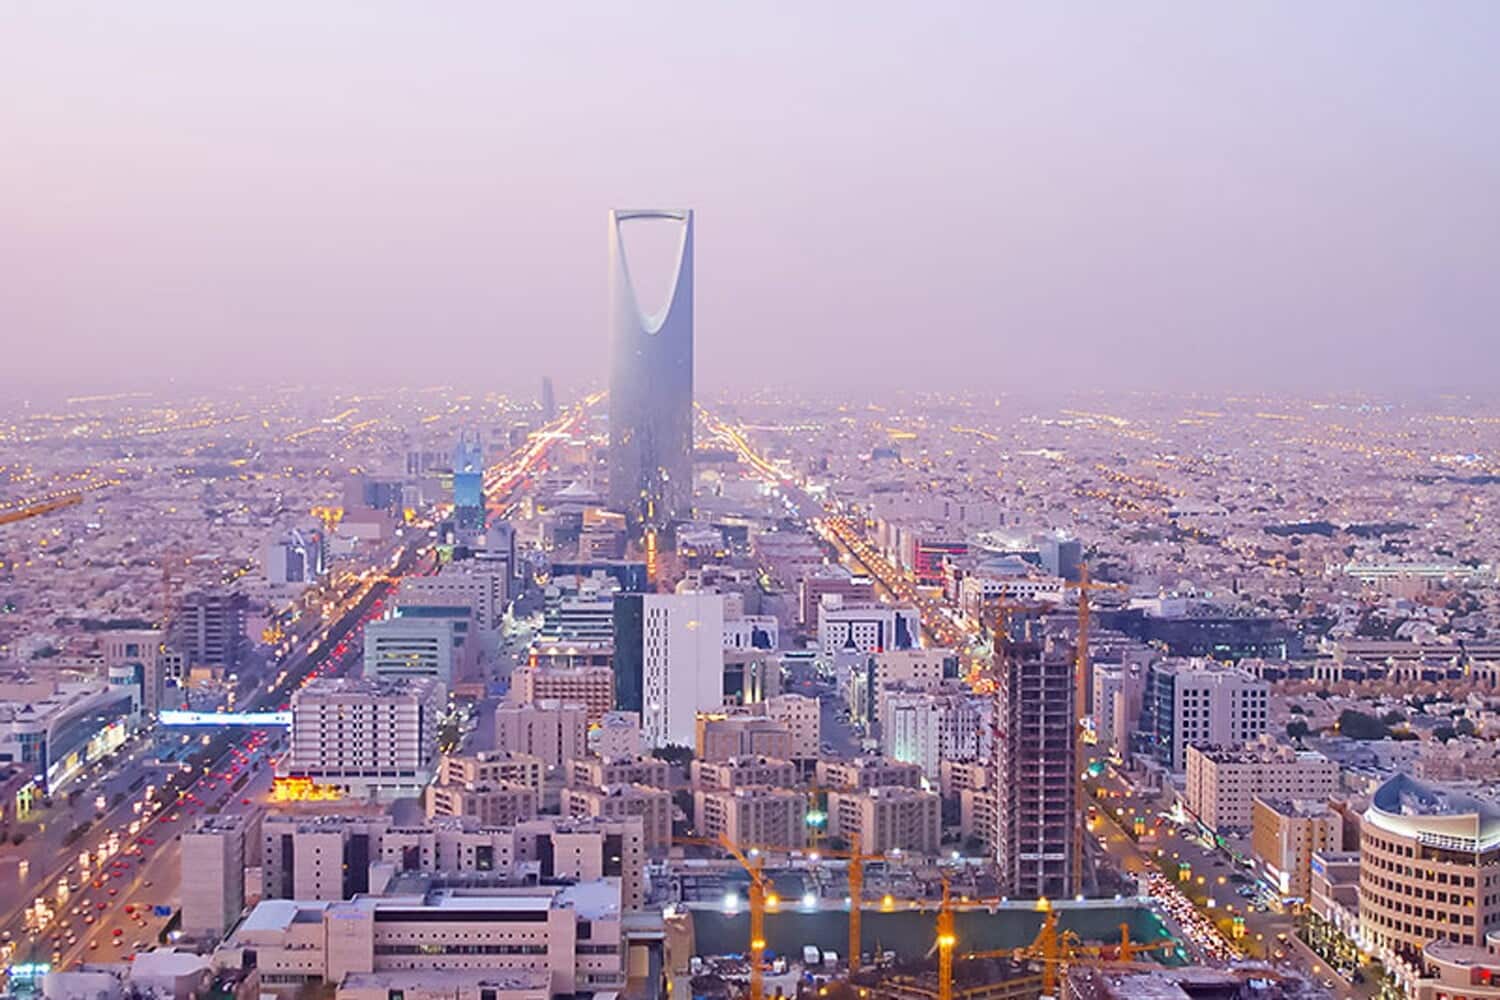 Saudi Arabia bans medical staff from wearing tight clothes, hats and makeup to work